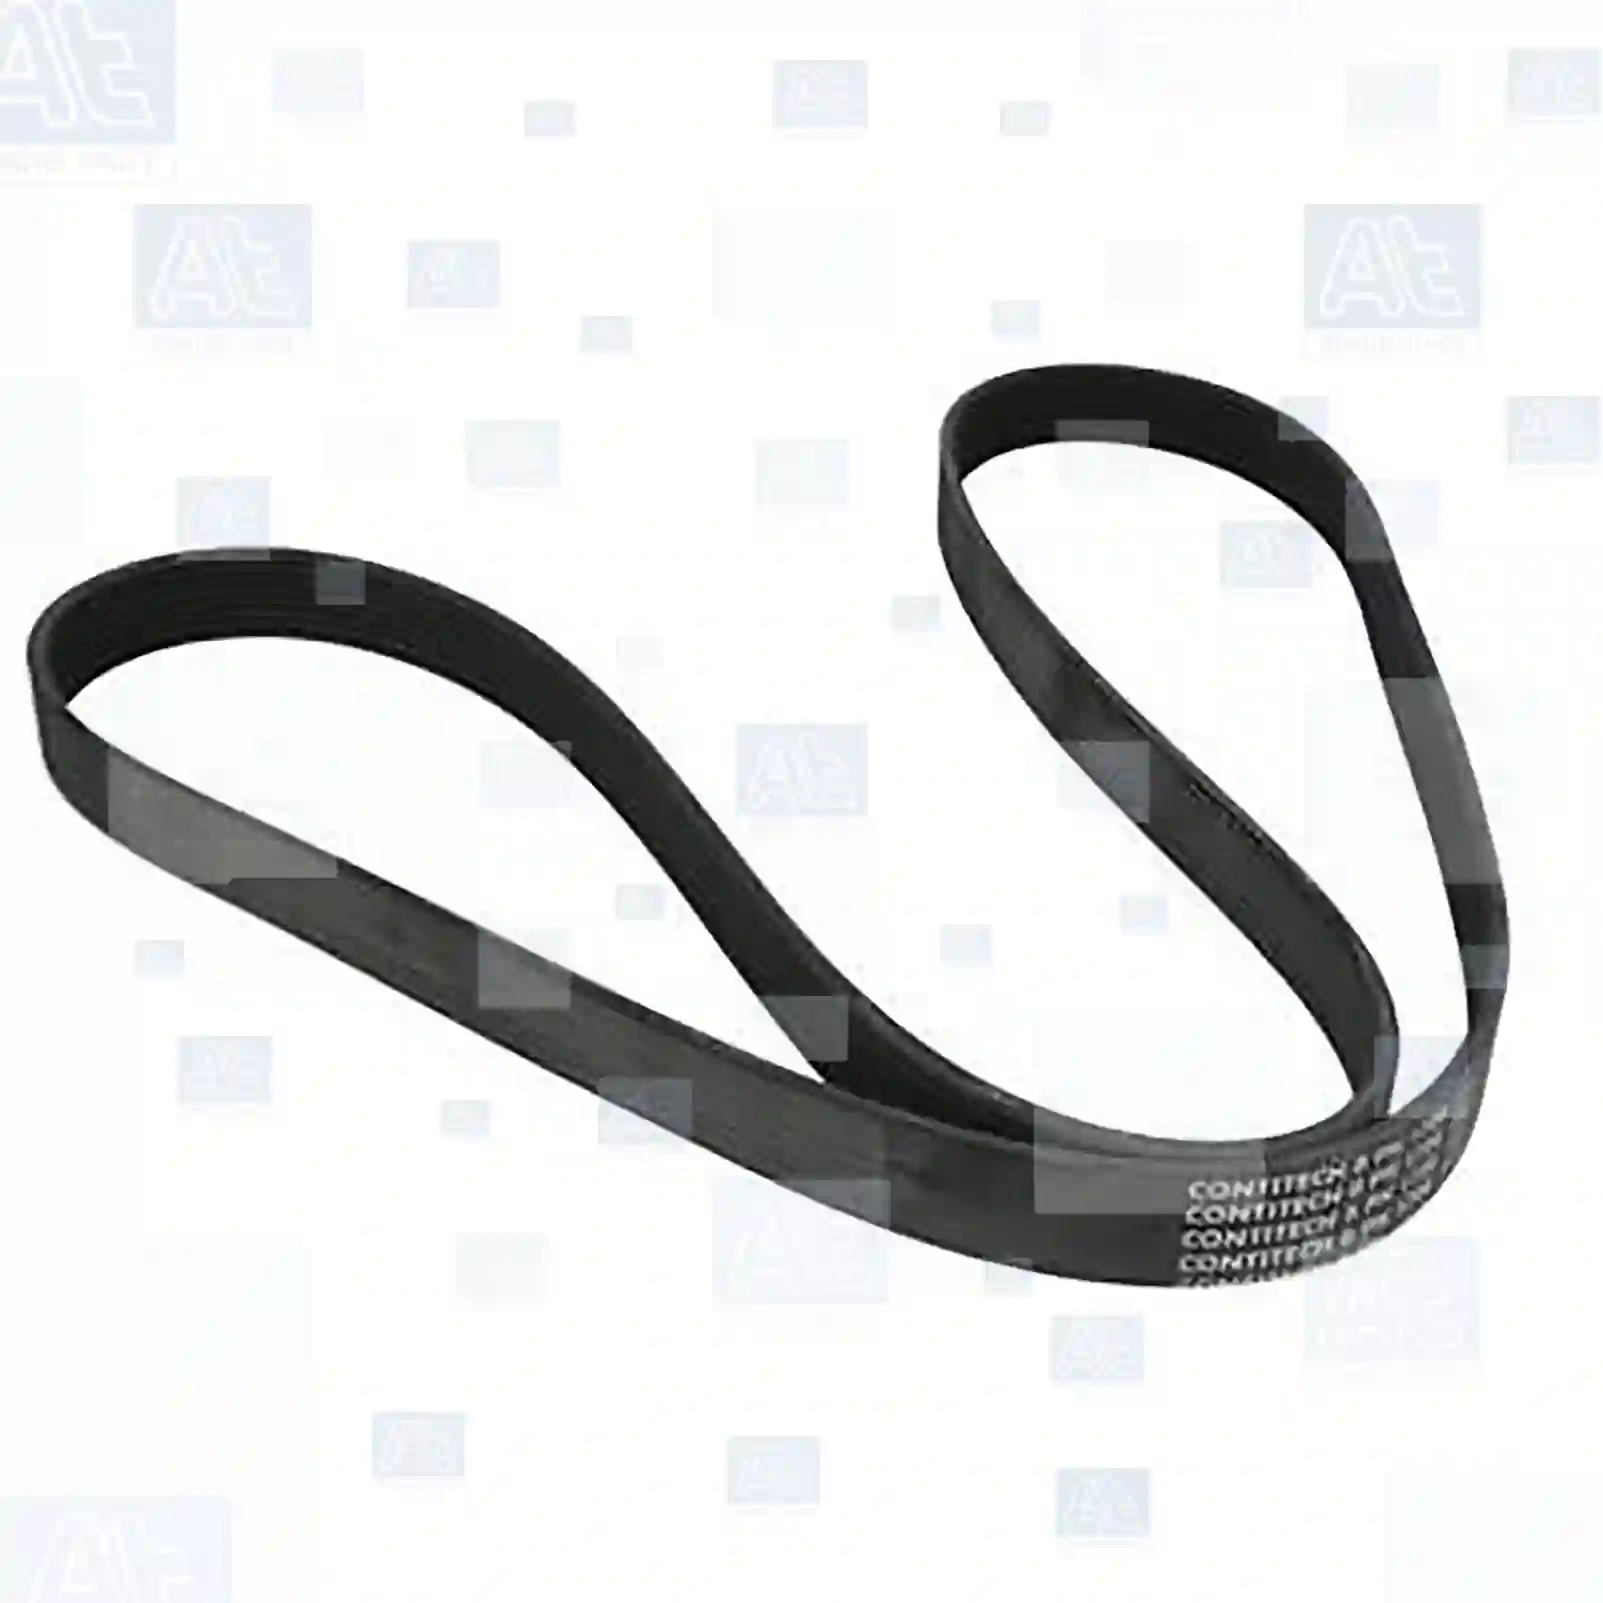 Multiribbed belt, at no 77708449, oem no: 46444537, 46769821, 46787906, 51855784, 55186364, 55189684, 55201362, 60813720, 71734715, 71734716, 71739910, 71749452, 037145933A, 037145933C, 047903137AB, 074145933AR, 078903137AP, 078903137BH, 078903137BM, 6Q0260849C, PQS10061, 11287794248, 4892519AB, 53010010, 5750GF, 5750GK, 5750GL, 5750HG, 5750HH, 5750R9, 5750S0, 5750T7, 5750T8, 5750VS, 5750VX, 5750X3, 5750XS, 9633010980, 9642574680, 9644351580, 9652258880, 9652746780, 4891974AC, 07310606, 55189686, 71734716, 71739923, 71739924, 71749452, 9629054080, 9638464180, 9638464380, 9644846680, 96225213, 96242337, 96284665, 96290540, 96313338, 96324103, 96324104, 1007485, 1011193, 1036917, 1427353, 1494787, 92062955, 37330-29100, 37330-29102, 4891974AC, 4892519AA, 53010010, 53010283, 07310606, 46444537, 46479557, 46769821, 46787907, 60816660, 71734716, 71749452, 9629054080, 9630796180, 9631333880, 9632410380, 9638464380, 9644846680, 96188881, 96324103, GFB101750, LR000996, PQS10061, 1E0315907, 1E0315907A, 1E0315907B, 1E0515907, 96FB6C301BC, 96MF6C301BC, 4451A060, 5750GF, 5750GK, 5750GL, 5750HG, 5750HH, 5750R9, 5750S0, 5750T7, 5750T8, 5750VS, 5750VX, 5750X3, 5750XS, 9633010980, 9642574680, 9644351580, 9652258880, 9652746780, 0000107175, 5000679653, 5000693140, PQS10061, 047903137AB, 074145933AR, 6Q0260849A, 03D145933A, 047903137AB, 074145933AR, 6Q0260849A, 6Q0260849C, 49180-65G10, 91829229, 9186352, 9434341, 037145933A, 037145933C, 03D145933A, 047903137AB, 074145933AD, 074145933AR, 6Q0260849, 74145933AD, 74145933AR, 78903137AP At Spare Part | Engine, Accelerator Pedal, Camshaft, Connecting Rod, Crankcase, Crankshaft, Cylinder Head, Engine Suspension Mountings, Exhaust Manifold, Exhaust Gas Recirculation, Filter Kits, Flywheel Housing, General Overhaul Kits, Engine, Intake Manifold, Oil Cleaner, Oil Cooler, Oil Filter, Oil Pump, Oil Sump, Piston & Liner, Sensor & Switch, Timing Case, Turbocharger, Cooling System, Belt Tensioner, Coolant Filter, Coolant Pipe, Corrosion Prevention Agent, Drive, Expansion Tank, Fan, Intercooler, Monitors & Gauges, Radiator, Thermostat, V-Belt / Timing belt, Water Pump, Fuel System, Electronical Injector Unit, Feed Pump, Fuel Filter, cpl., Fuel Gauge Sender,  Fuel Line, Fuel Pump, Fuel Tank, Injection Line Kit, Injection Pump, Exhaust System, Clutch & Pedal, Gearbox, Propeller Shaft, Axles, Brake System, Hubs & Wheels, Suspension, Leaf Spring, Universal Parts / Accessories, Steering, Electrical System, Cabin Multiribbed belt, at no 77708449, oem no: 46444537, 46769821, 46787906, 51855784, 55186364, 55189684, 55201362, 60813720, 71734715, 71734716, 71739910, 71749452, 037145933A, 037145933C, 047903137AB, 074145933AR, 078903137AP, 078903137BH, 078903137BM, 6Q0260849C, PQS10061, 11287794248, 4892519AB, 53010010, 5750GF, 5750GK, 5750GL, 5750HG, 5750HH, 5750R9, 5750S0, 5750T7, 5750T8, 5750VS, 5750VX, 5750X3, 5750XS, 9633010980, 9642574680, 9644351580, 9652258880, 9652746780, 4891974AC, 07310606, 55189686, 71734716, 71739923, 71739924, 71749452, 9629054080, 9638464180, 9638464380, 9644846680, 96225213, 96242337, 96284665, 96290540, 96313338, 96324103, 96324104, 1007485, 1011193, 1036917, 1427353, 1494787, 92062955, 37330-29100, 37330-29102, 4891974AC, 4892519AA, 53010010, 53010283, 07310606, 46444537, 46479557, 46769821, 46787907, 60816660, 71734716, 71749452, 9629054080, 9630796180, 9631333880, 9632410380, 9638464380, 9644846680, 96188881, 96324103, GFB101750, LR000996, PQS10061, 1E0315907, 1E0315907A, 1E0315907B, 1E0515907, 96FB6C301BC, 96MF6C301BC, 4451A060, 5750GF, 5750GK, 5750GL, 5750HG, 5750HH, 5750R9, 5750S0, 5750T7, 5750T8, 5750VS, 5750VX, 5750X3, 5750XS, 9633010980, 9642574680, 9644351580, 9652258880, 9652746780, 0000107175, 5000679653, 5000693140, PQS10061, 047903137AB, 074145933AR, 6Q0260849A, 03D145933A, 047903137AB, 074145933AR, 6Q0260849A, 6Q0260849C, 49180-65G10, 91829229, 9186352, 9434341, 037145933A, 037145933C, 03D145933A, 047903137AB, 074145933AD, 074145933AR, 6Q0260849, 74145933AD, 74145933AR, 78903137AP At Spare Part | Engine, Accelerator Pedal, Camshaft, Connecting Rod, Crankcase, Crankshaft, Cylinder Head, Engine Suspension Mountings, Exhaust Manifold, Exhaust Gas Recirculation, Filter Kits, Flywheel Housing, General Overhaul Kits, Engine, Intake Manifold, Oil Cleaner, Oil Cooler, Oil Filter, Oil Pump, Oil Sump, Piston & Liner, Sensor & Switch, Timing Case, Turbocharger, Cooling System, Belt Tensioner, Coolant Filter, Coolant Pipe, Corrosion Prevention Agent, Drive, Expansion Tank, Fan, Intercooler, Monitors & Gauges, Radiator, Thermostat, V-Belt / Timing belt, Water Pump, Fuel System, Electronical Injector Unit, Feed Pump, Fuel Filter, cpl., Fuel Gauge Sender,  Fuel Line, Fuel Pump, Fuel Tank, Injection Line Kit, Injection Pump, Exhaust System, Clutch & Pedal, Gearbox, Propeller Shaft, Axles, Brake System, Hubs & Wheels, Suspension, Leaf Spring, Universal Parts / Accessories, Steering, Electrical System, Cabin